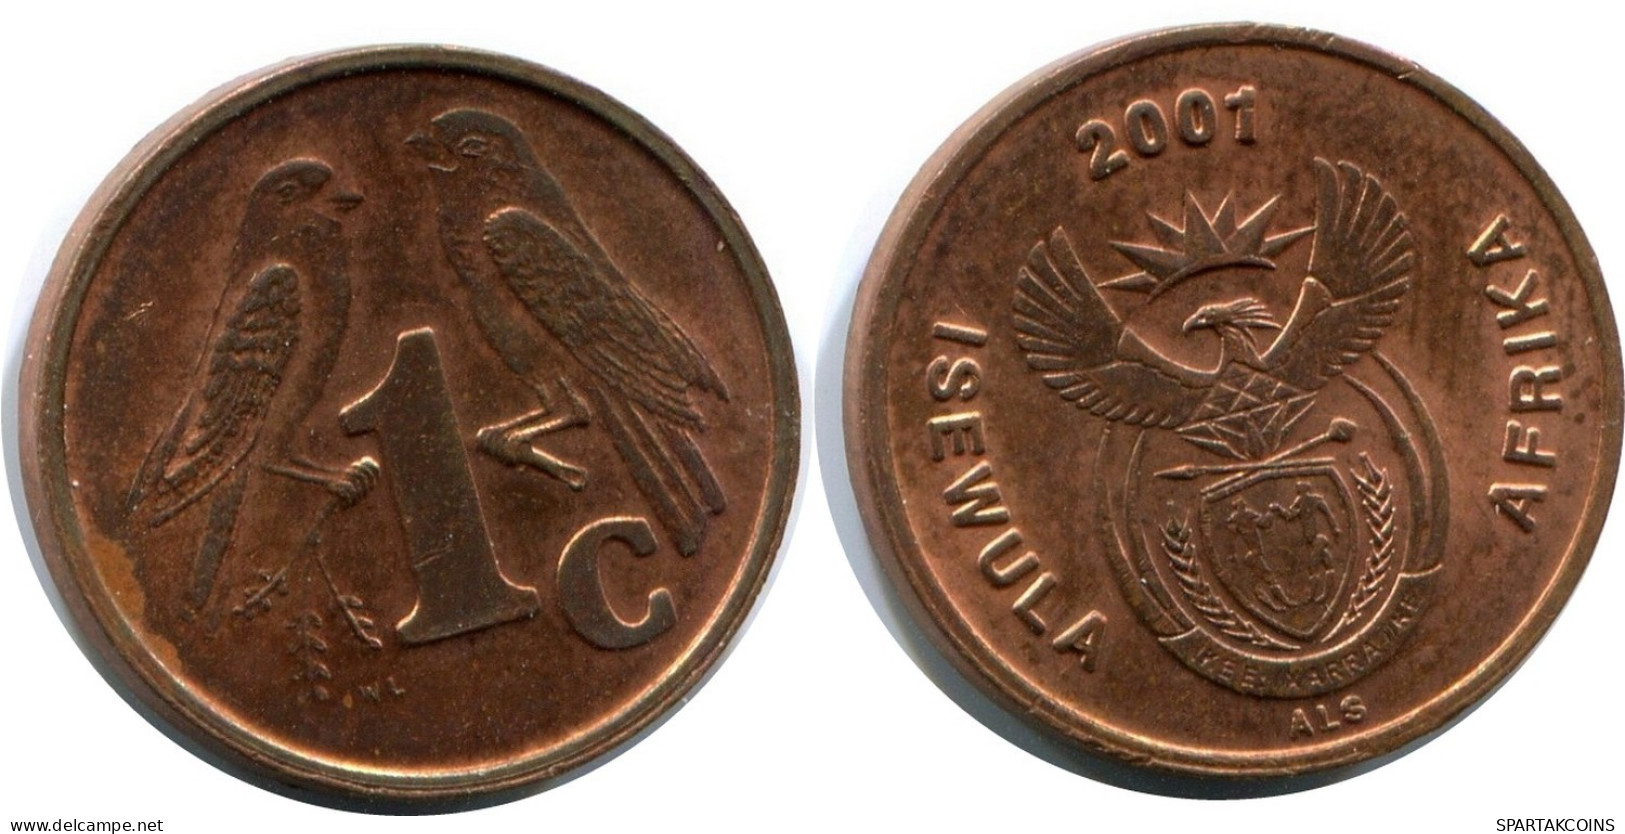 1 CENT 2001 SOUTH AFRICA Coin #AX181.U.A - Sud Africa